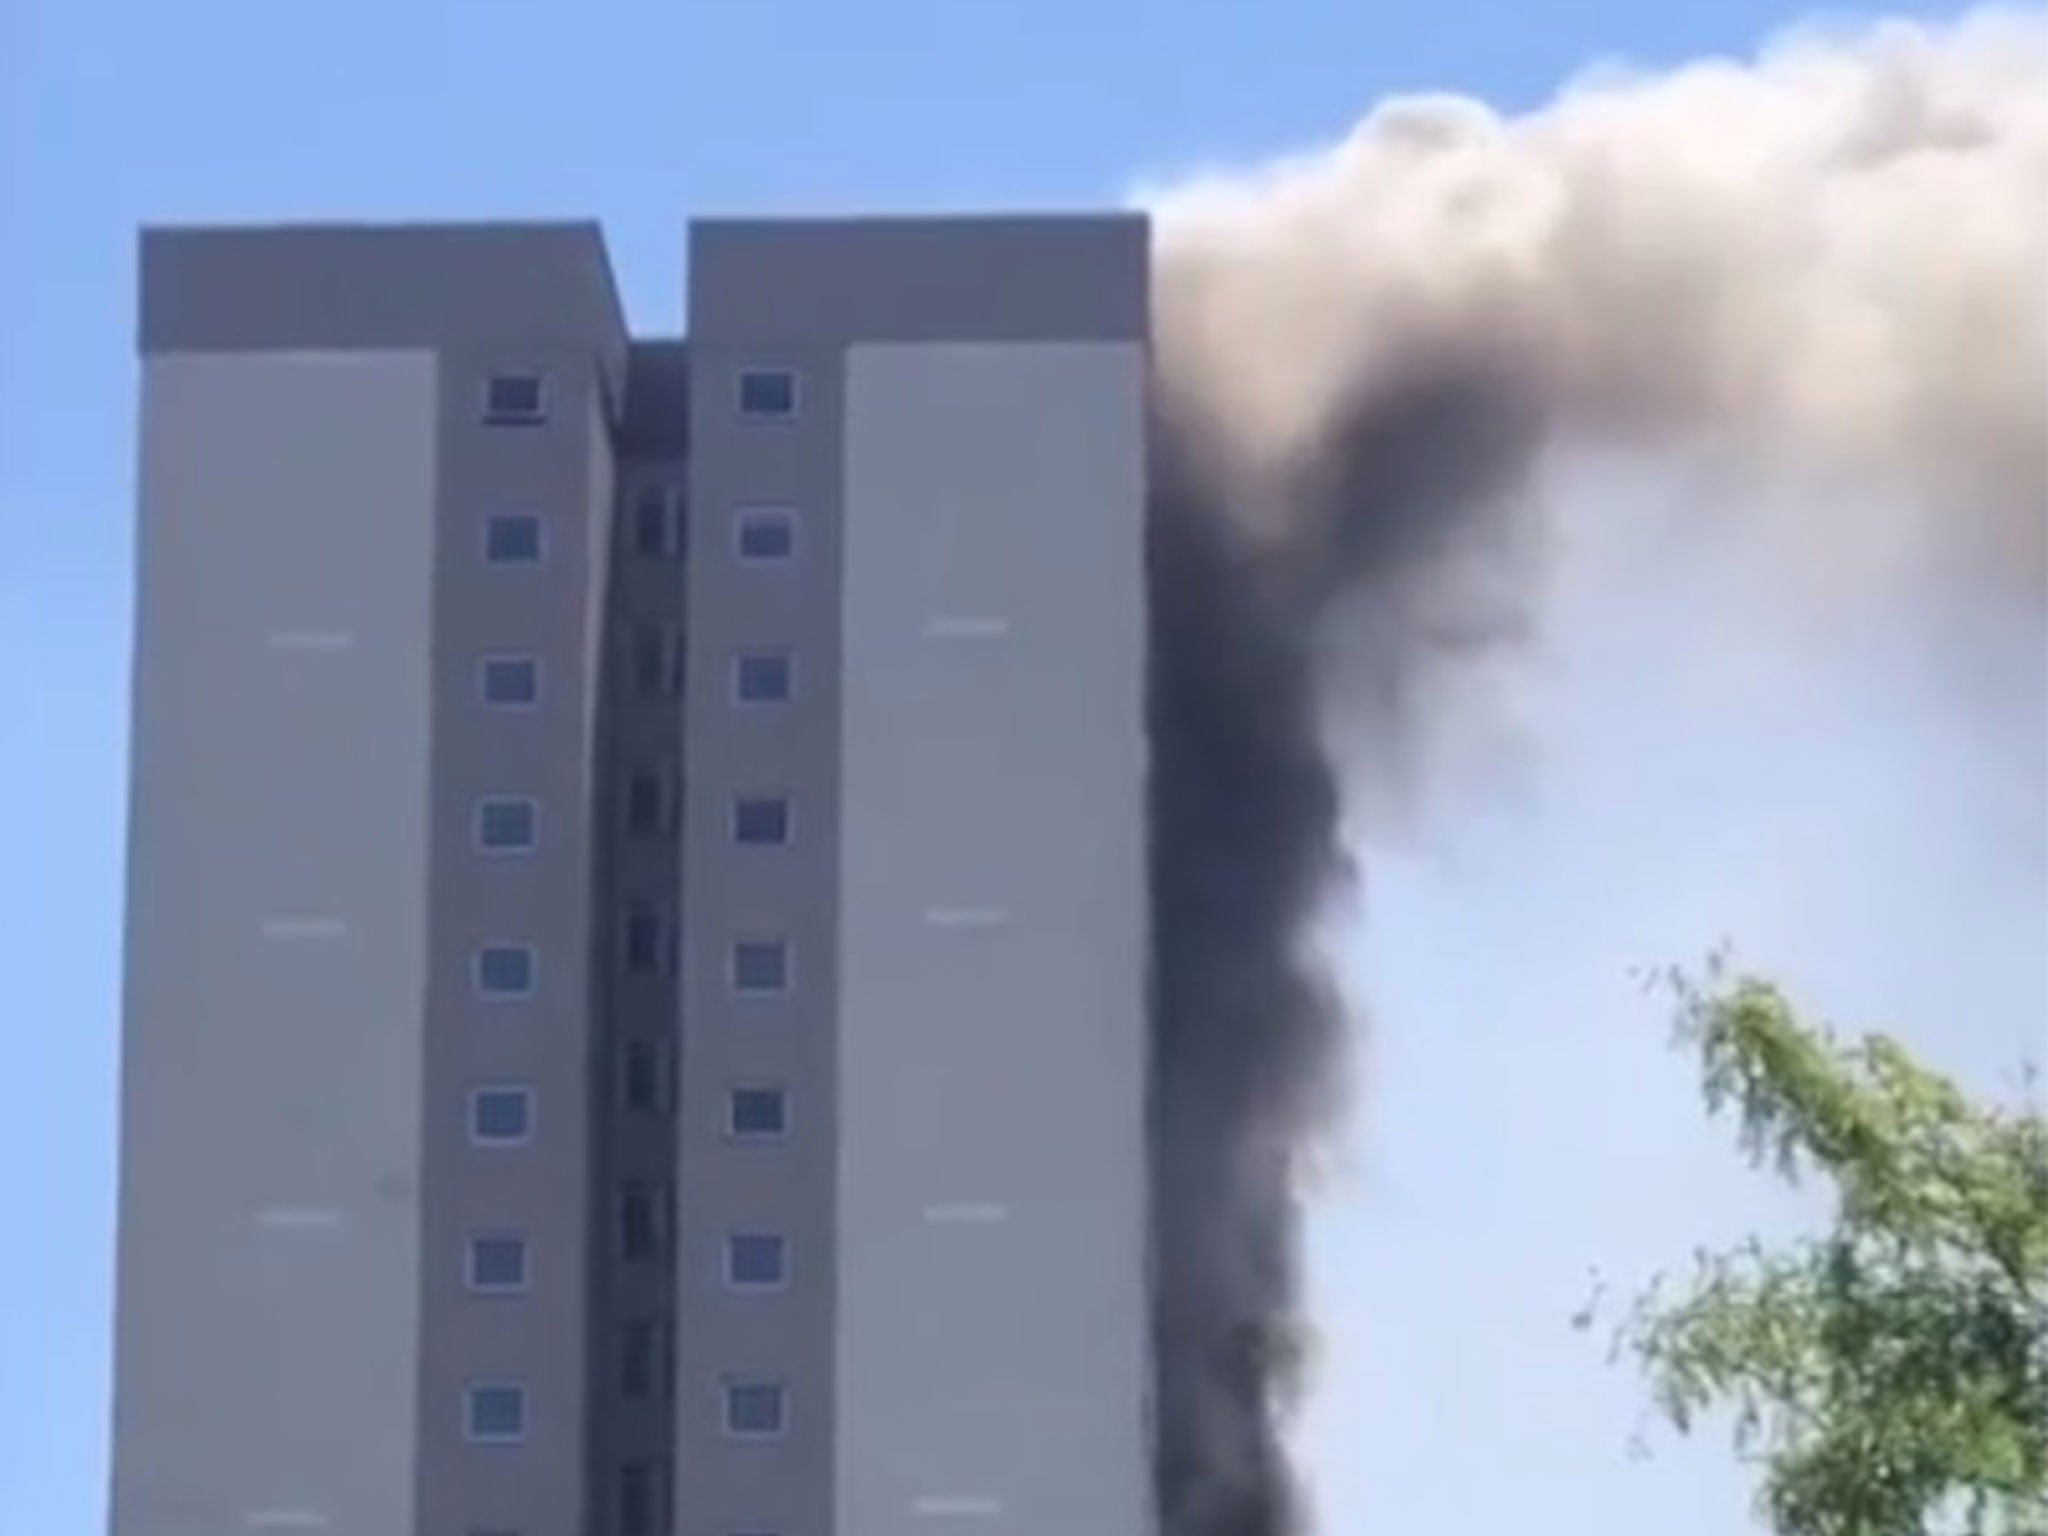 Mile End fire: More than 50 firefighters tackle 12th floor blaze in east London tower block